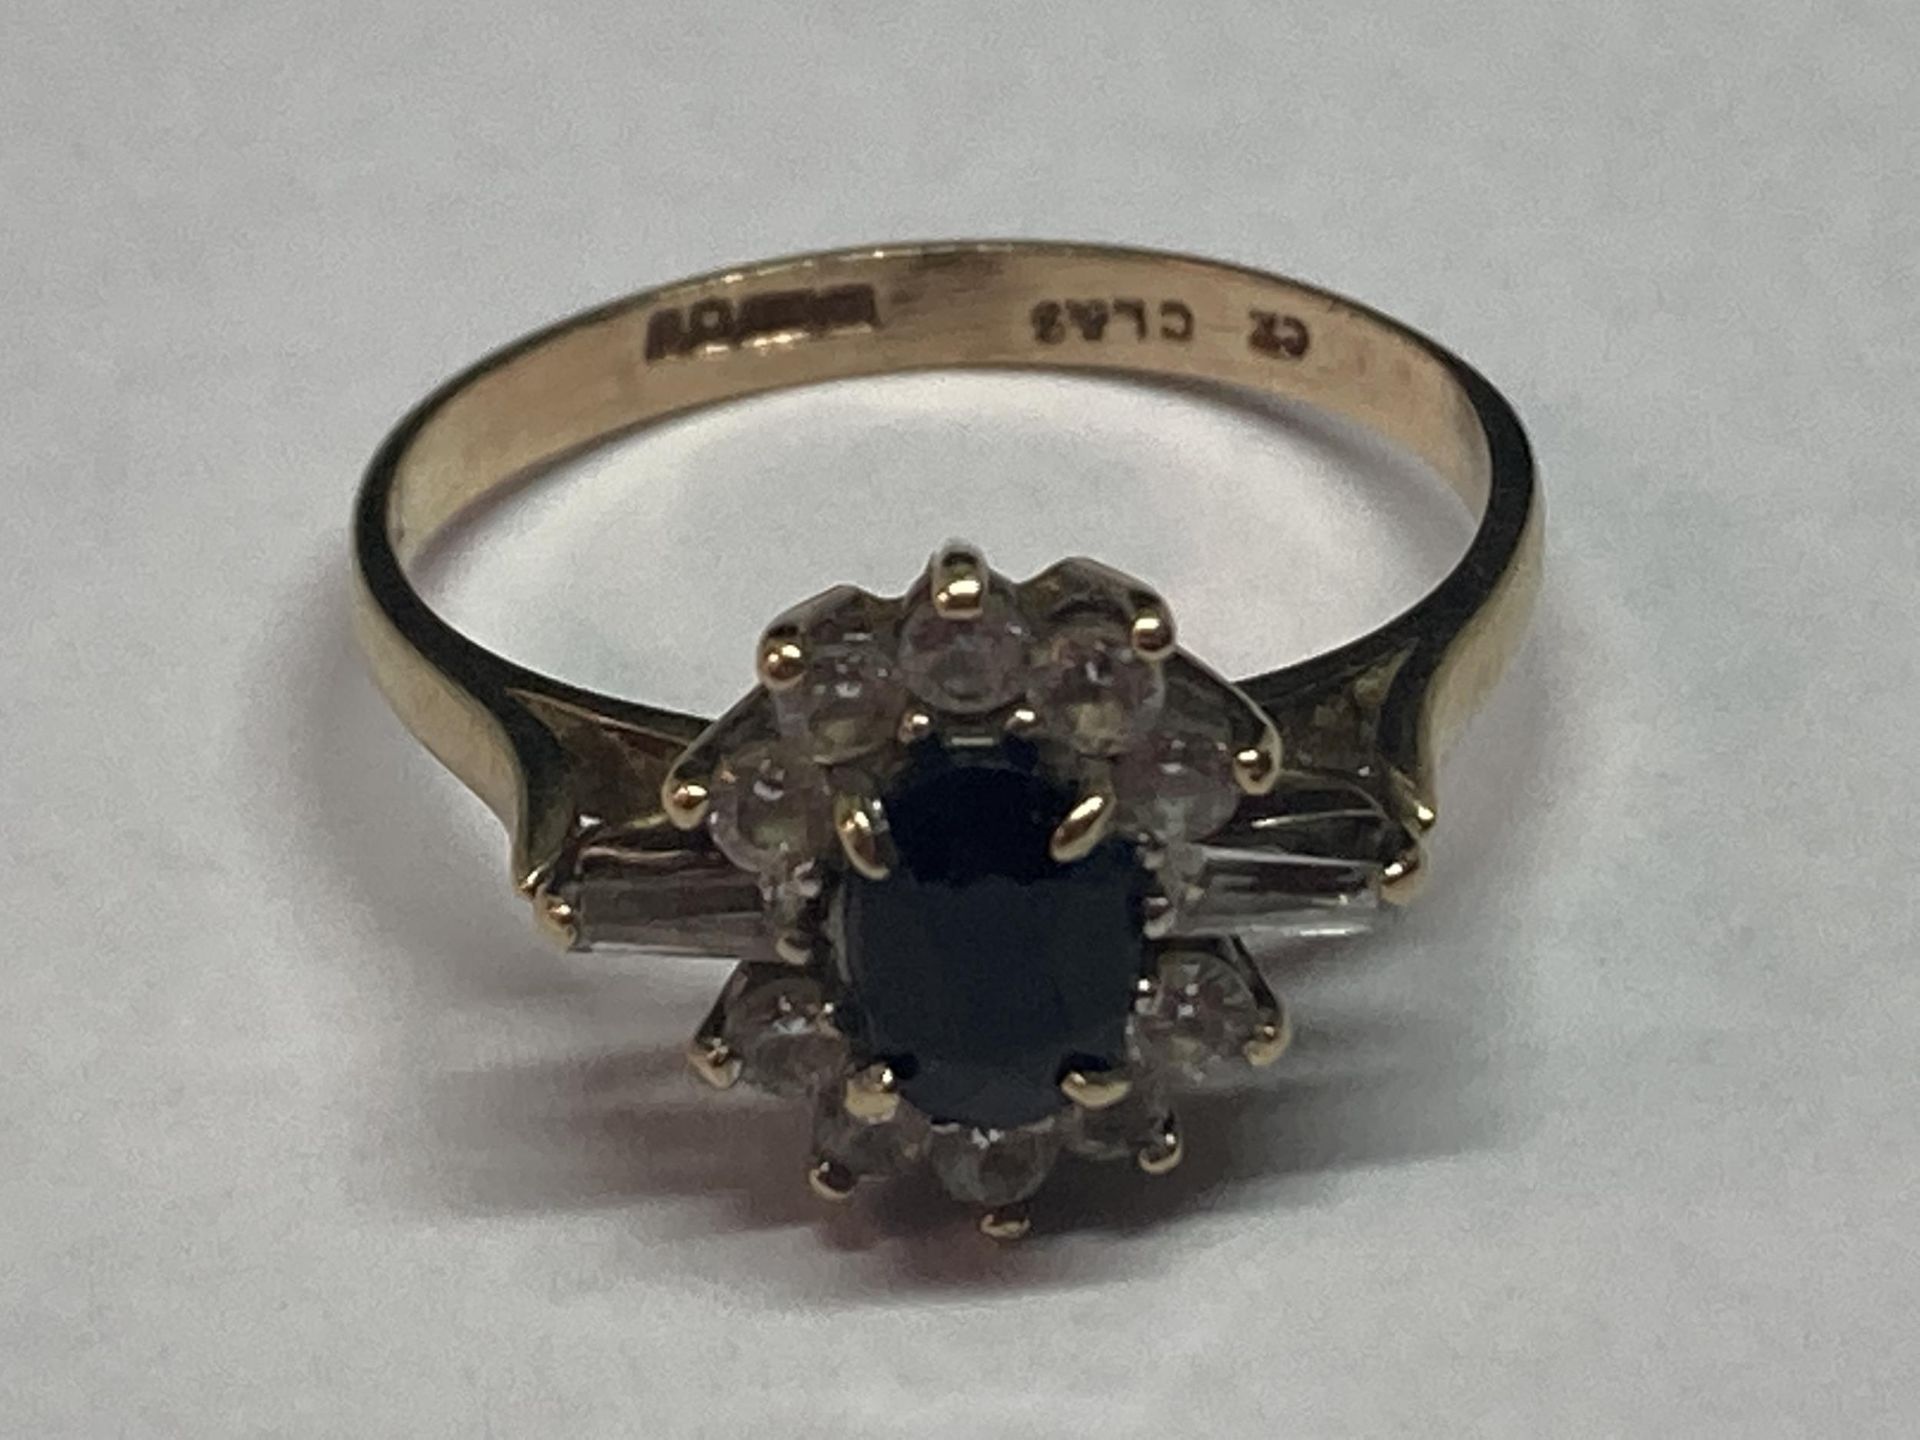 A 9 CARAT GOLD RING WITH A CENTRE SAPPHIRE SURROUNDED BY CUBIC ZIRCONIAS SIZE M